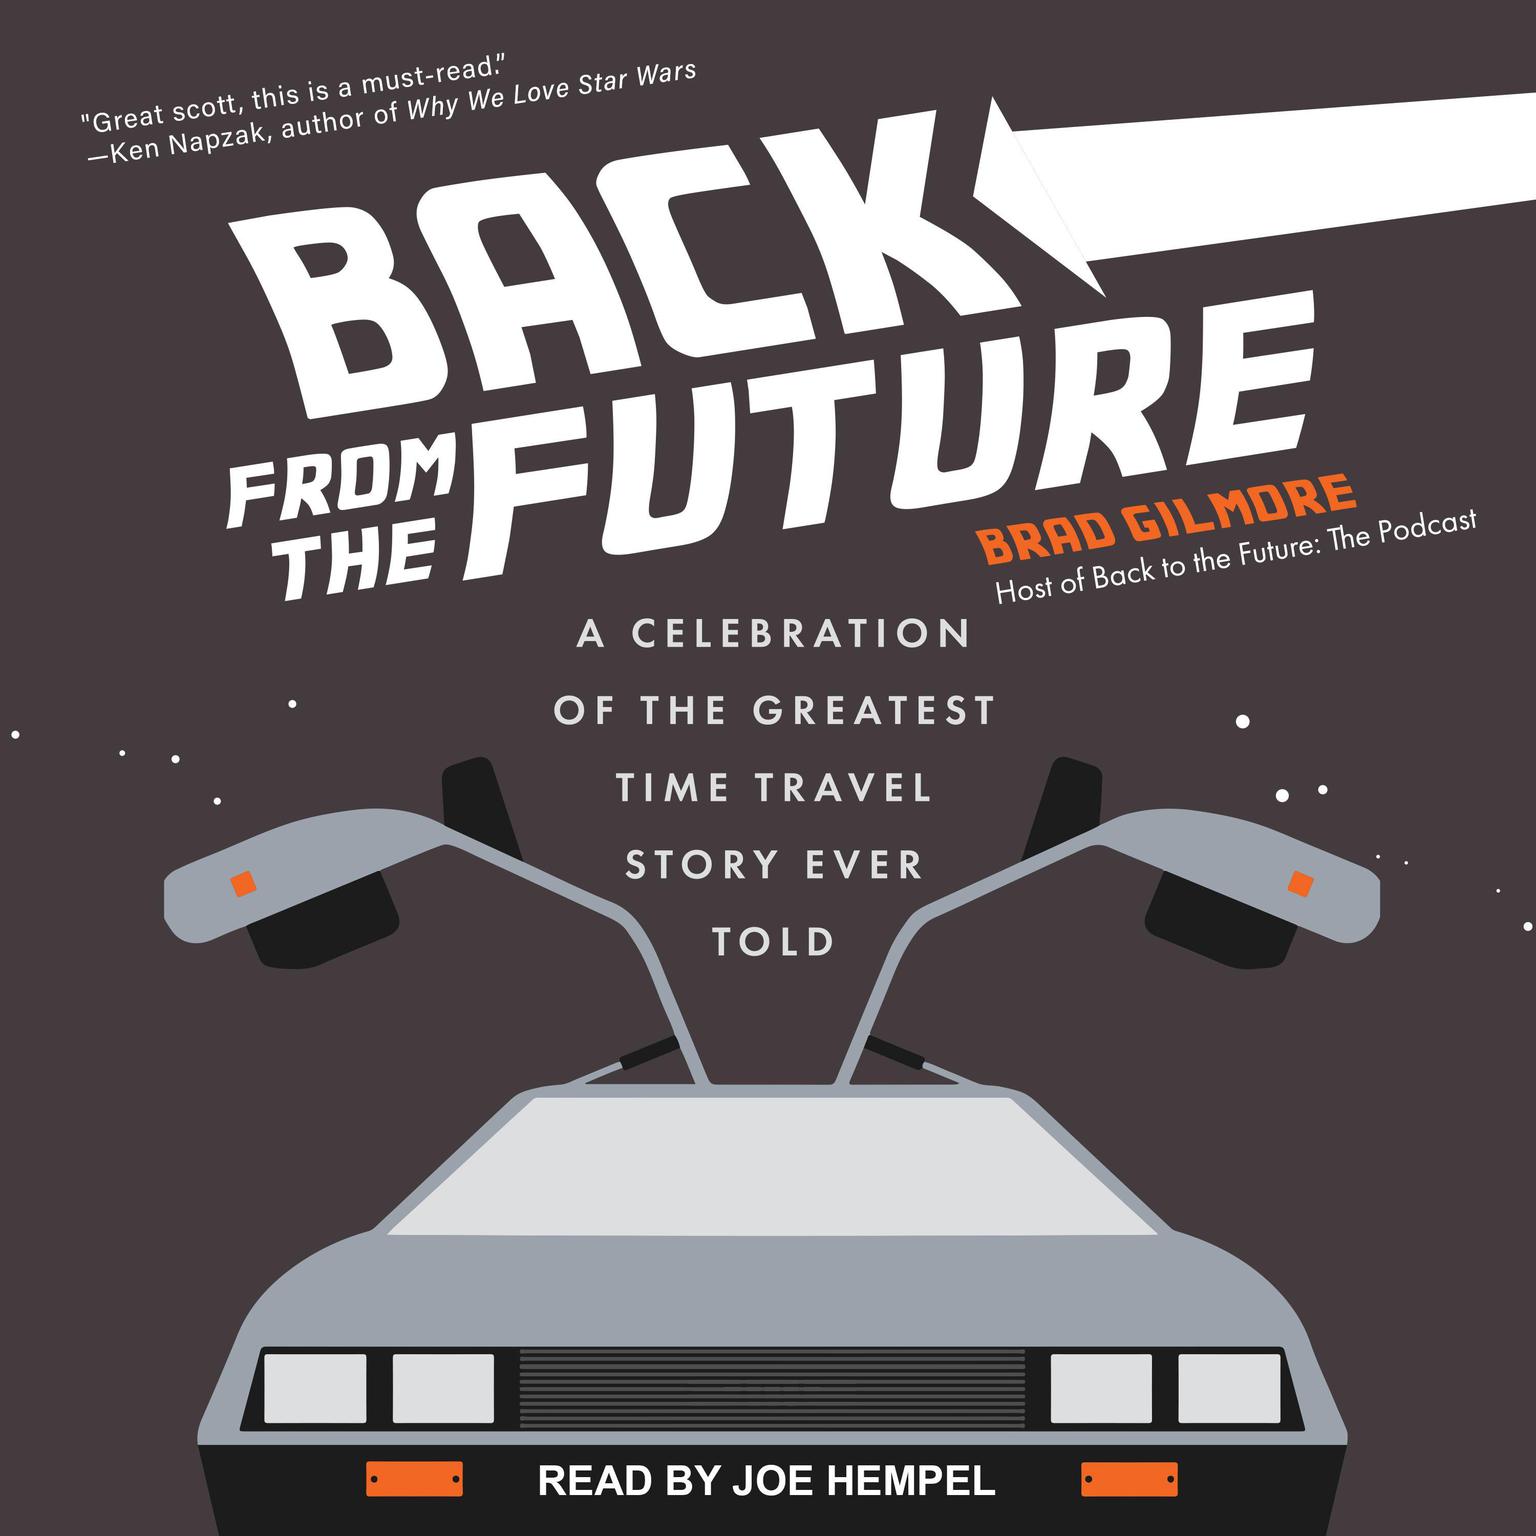 Back From the Future: A Celebration of the Greatest Time Travel Story Ever Told Audiobook, by Brad Gilmore